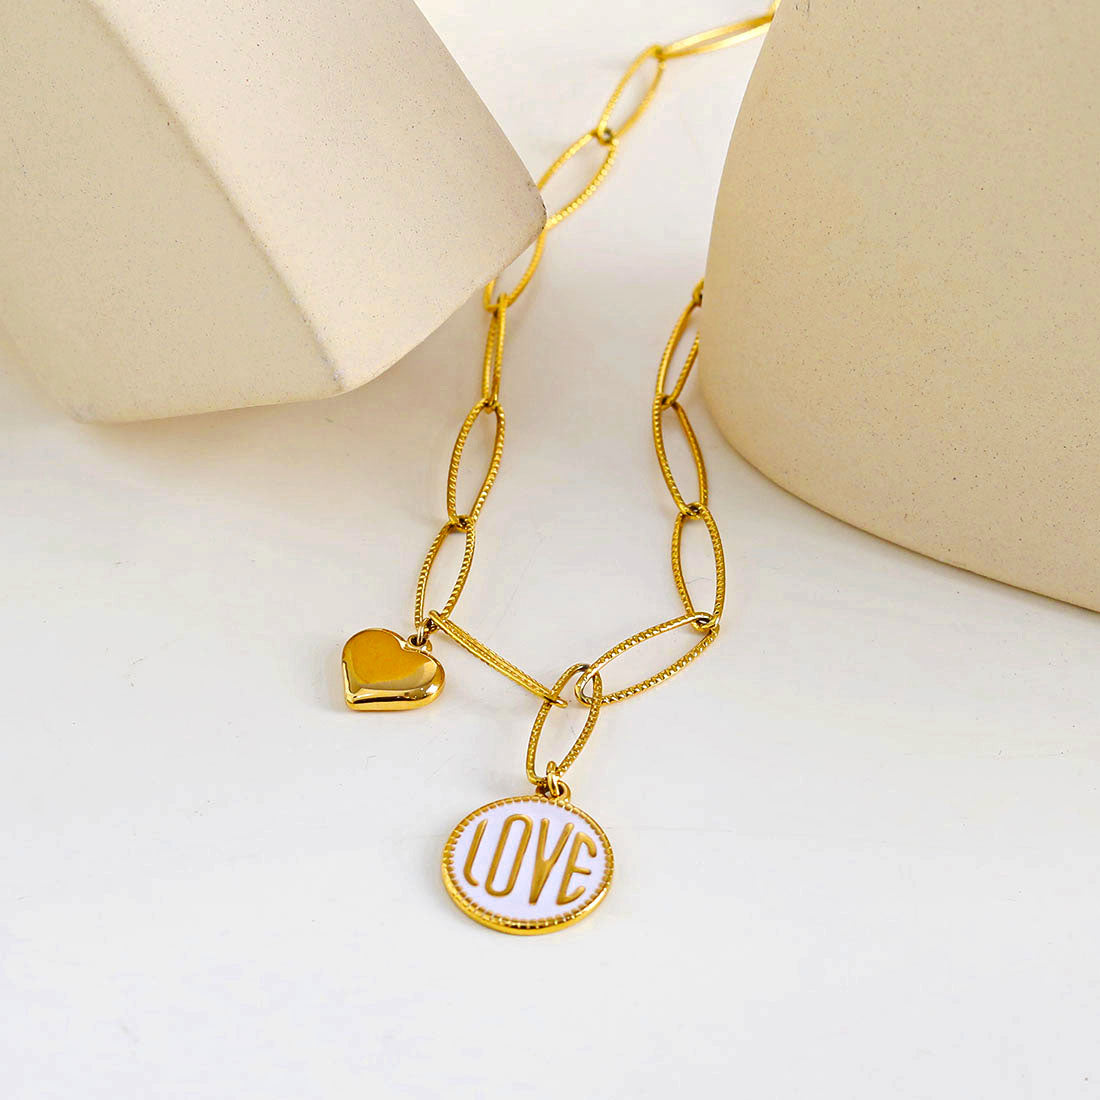 EMMA Retro LOVE Scripted Pendant on a Contemporary Chain Linked Necklace